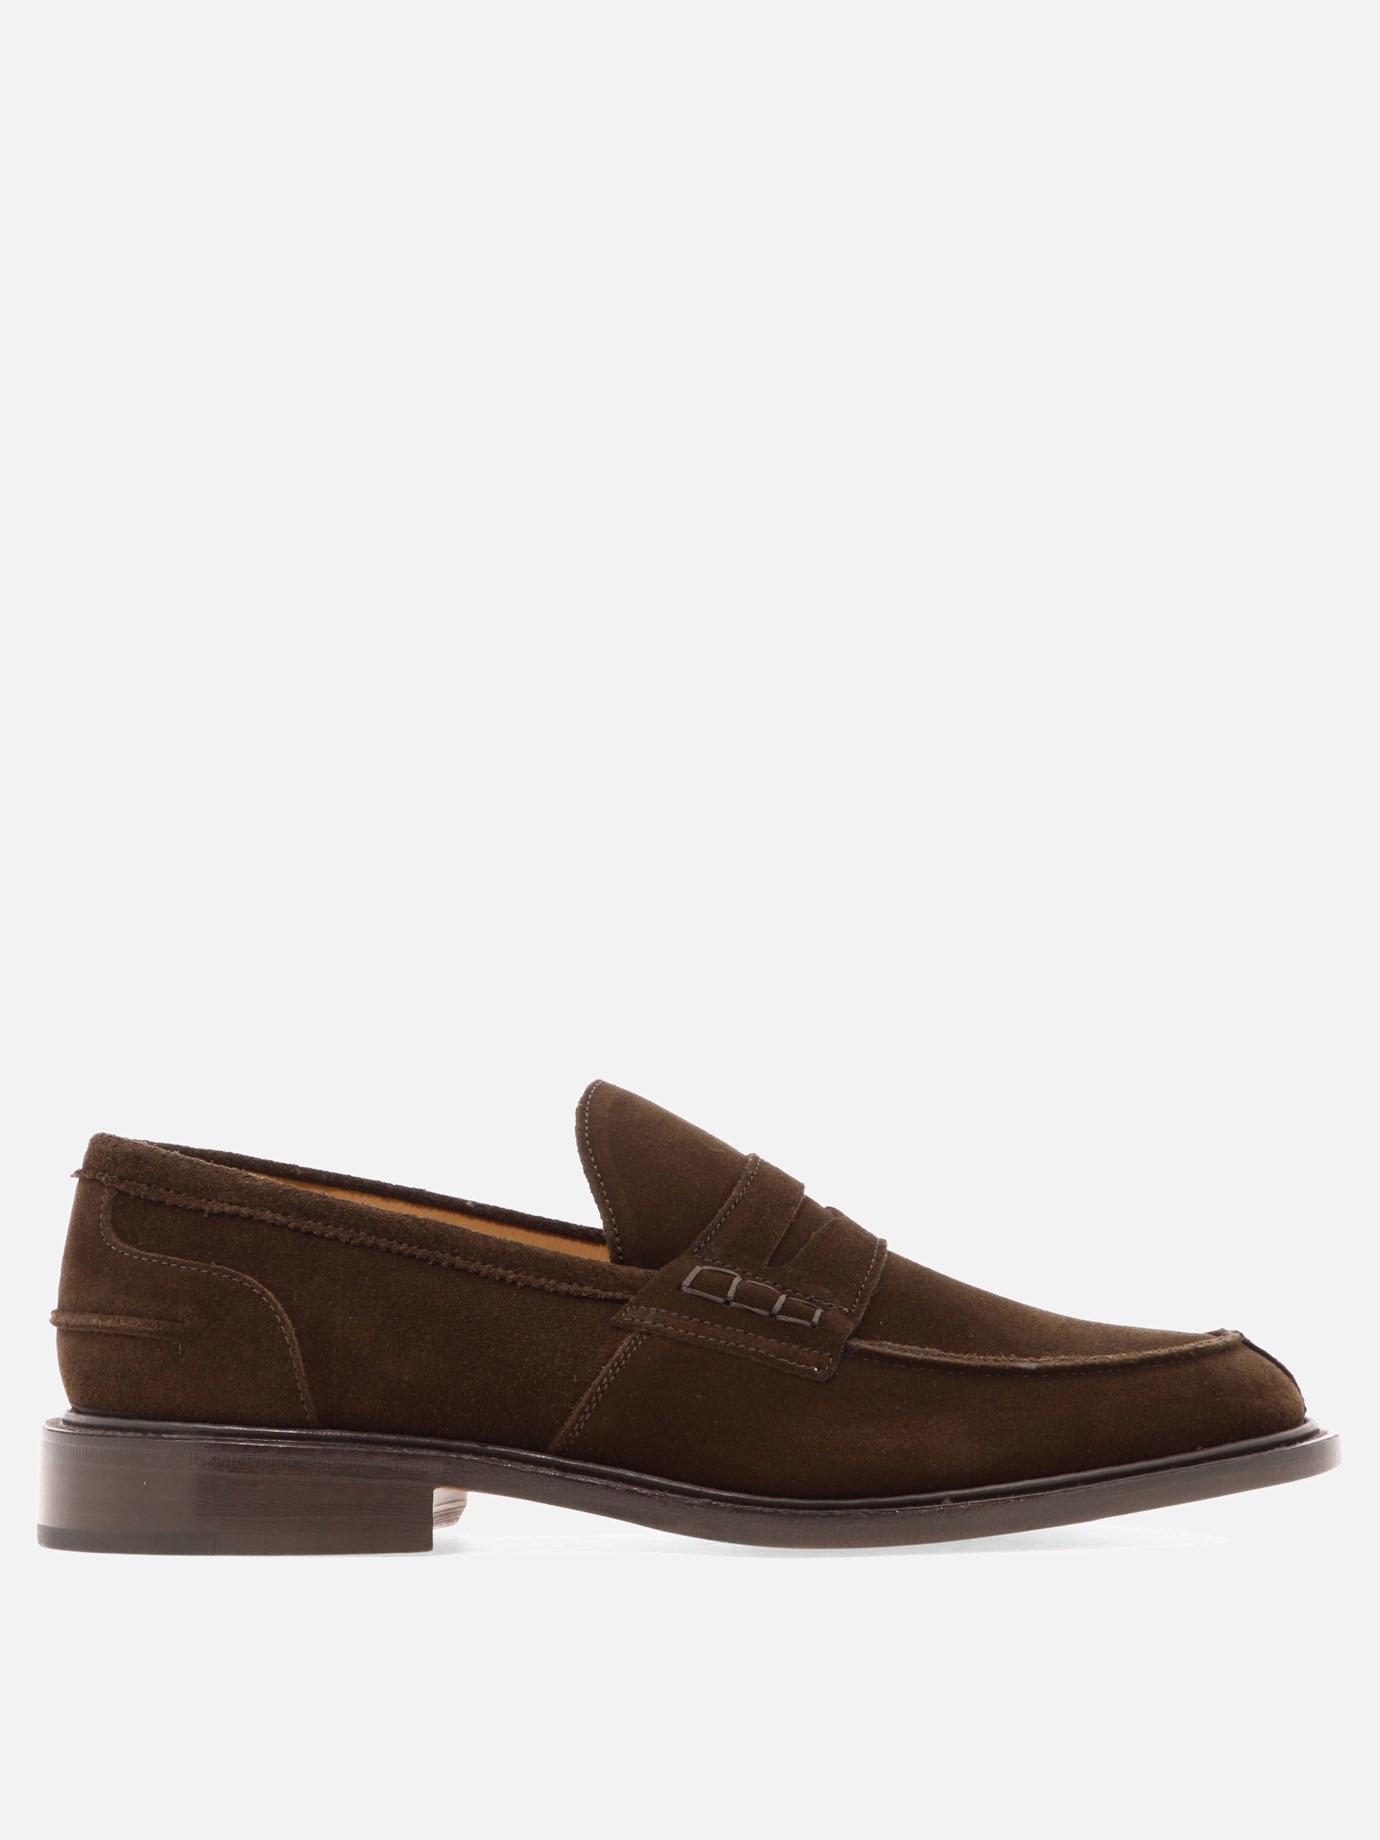  James  loafersby Tricker's - 0